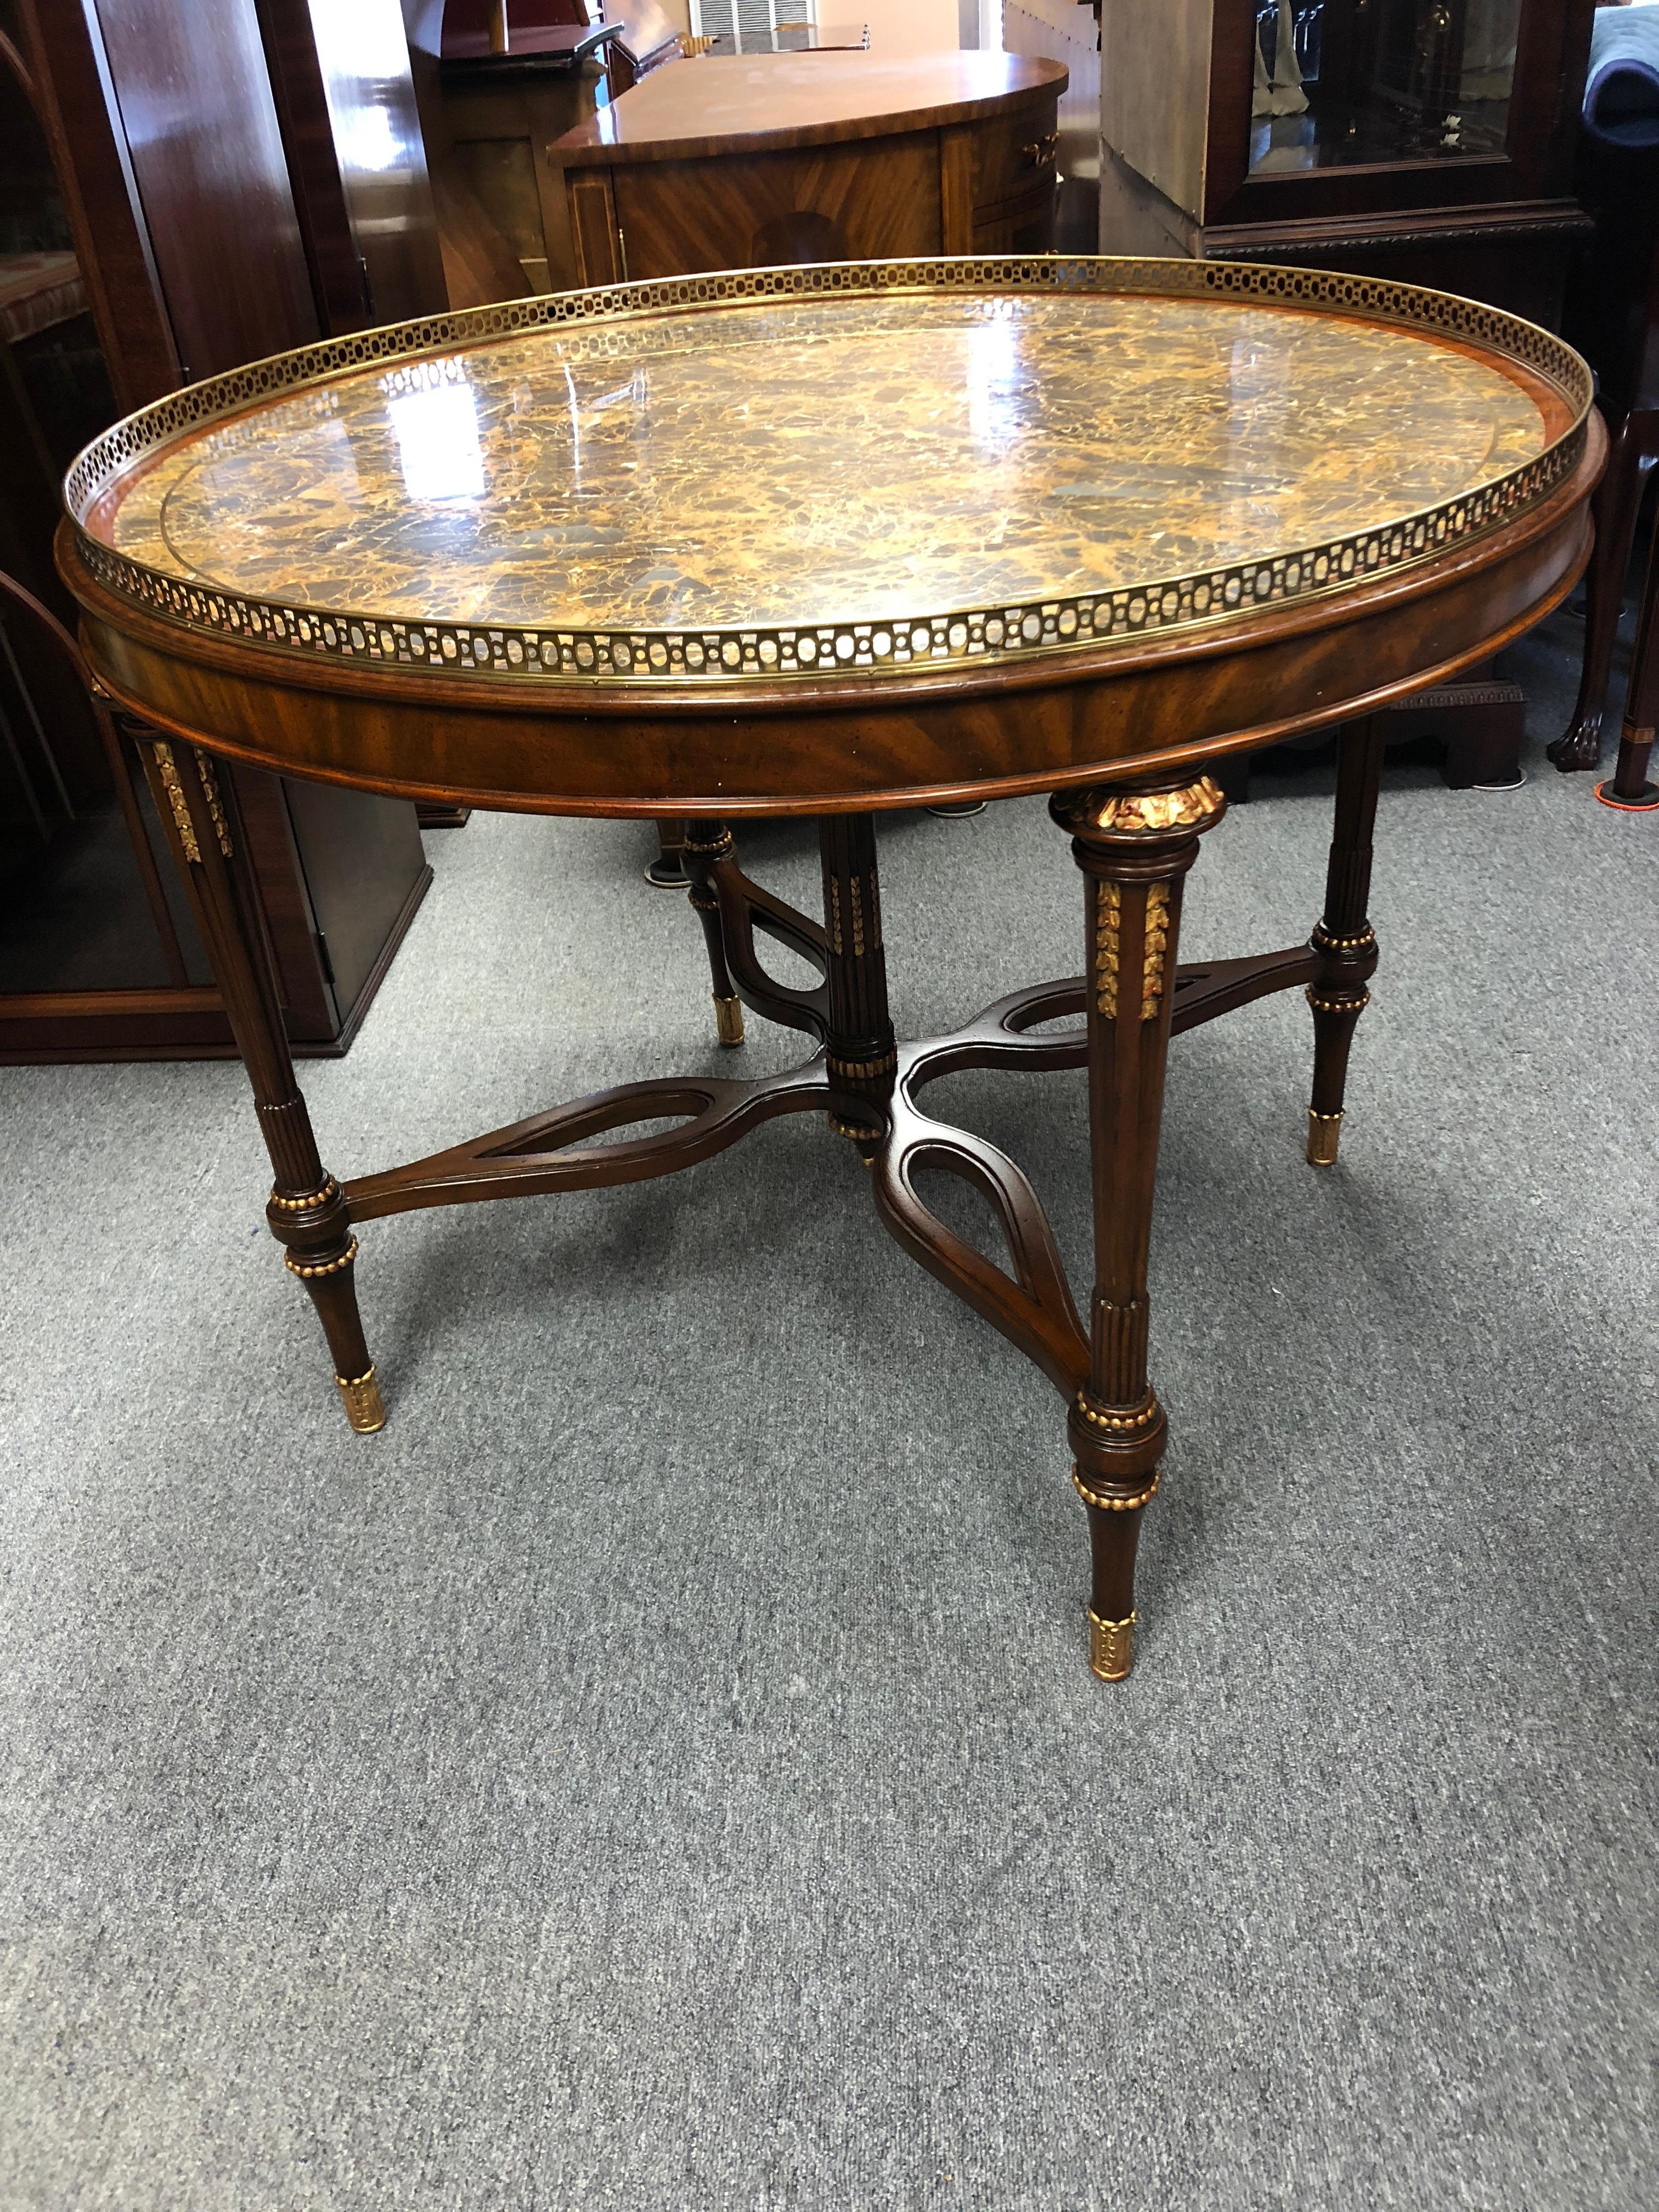 Impressive round center or side table by Maitland Smith having an inlaid faux marble top with pierced brass gallery and decorative brass band, with a gorgeous mahogany and gilded ornate base with particularly pretty central column and stretcher